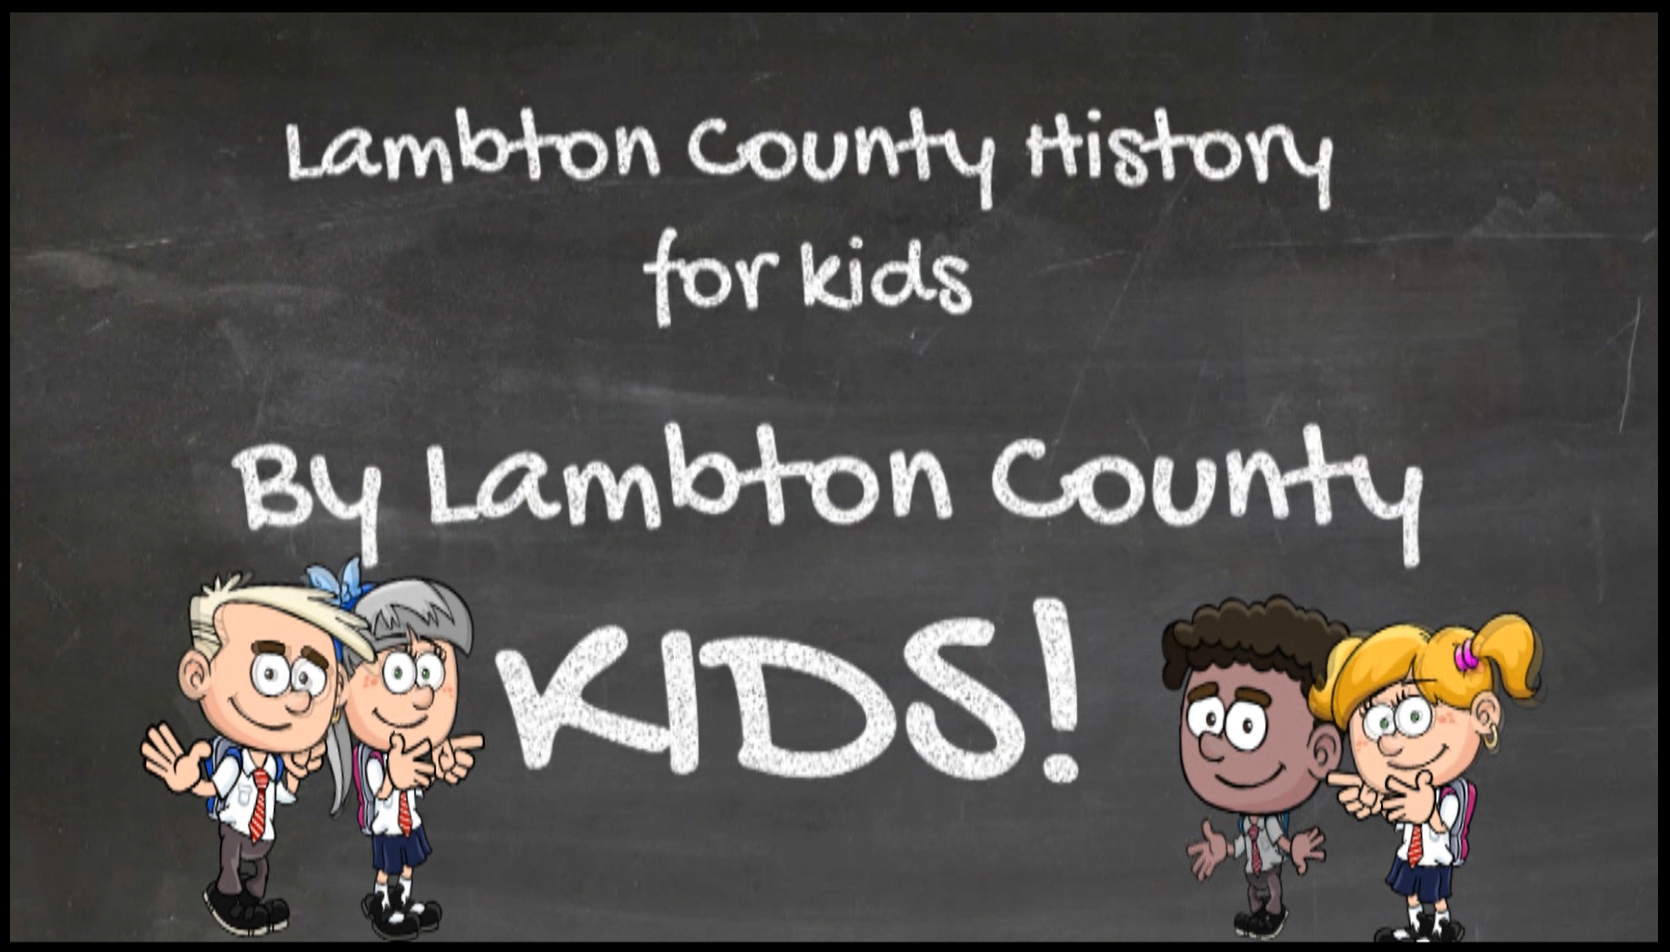 Chalkboard background with four cartoon characters with text, "Lambton County History for kids By Lambton County Kids!"